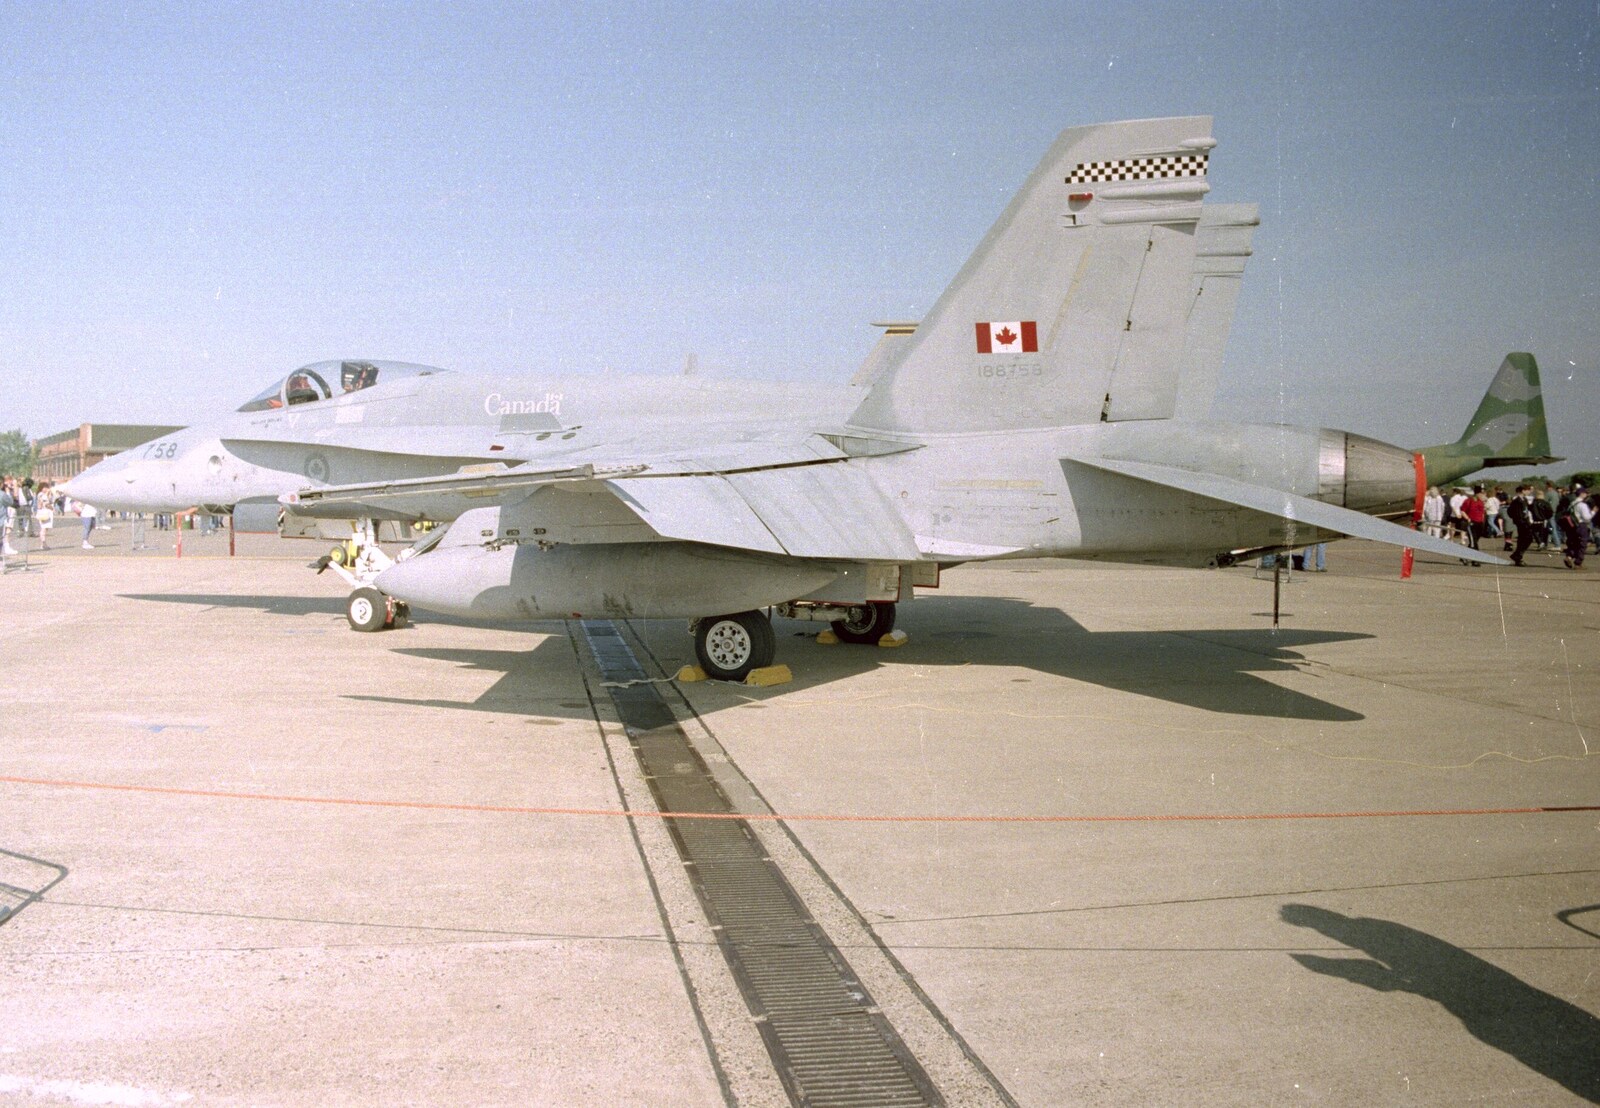 A Canadian Air Force F-16 from The Mildenhall Air Fete, Mildenhall, Suffolk - 29th May 1994